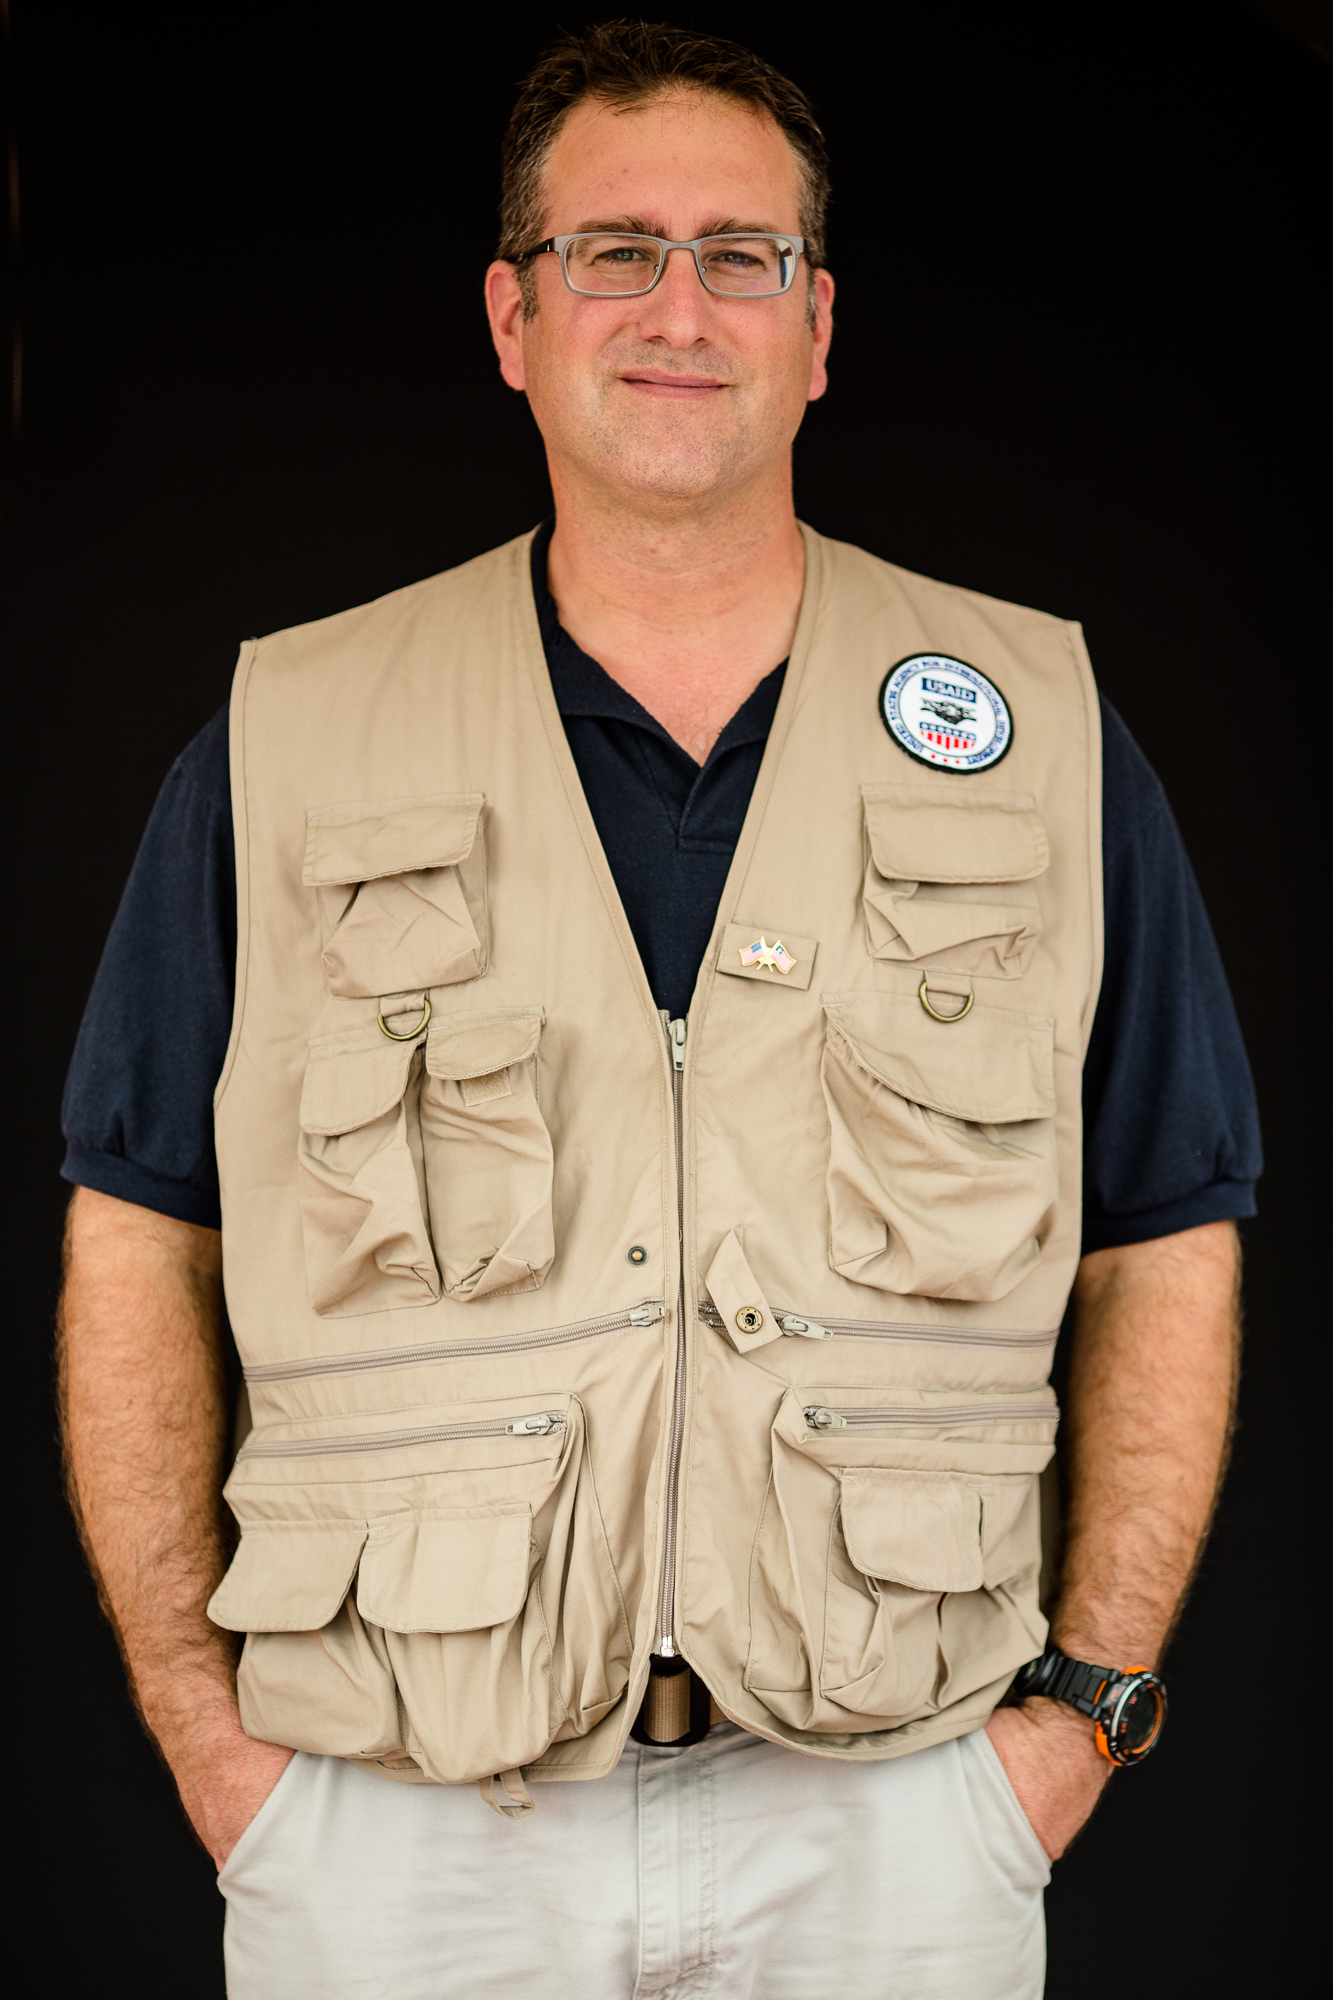   Doug Ebert   Staff Health and Safety Officer  